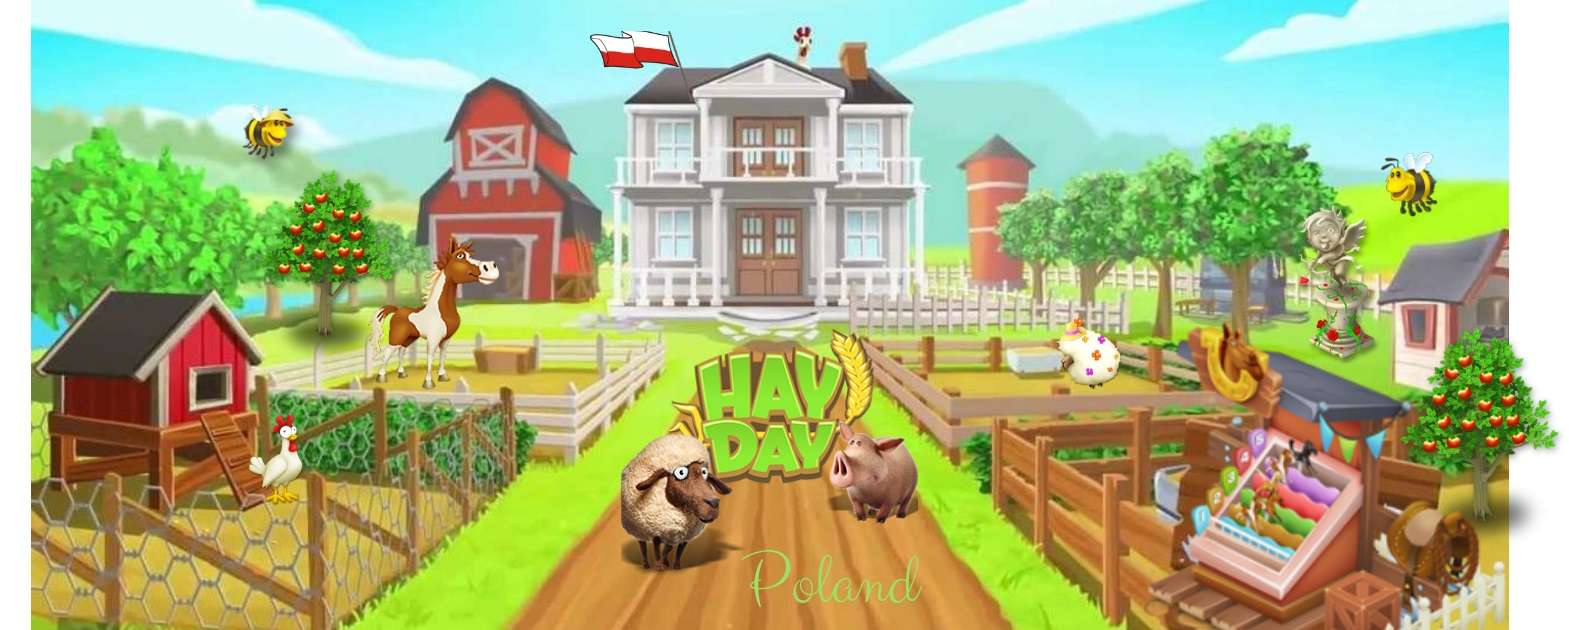 Hay Day Poland Online-Puzzle